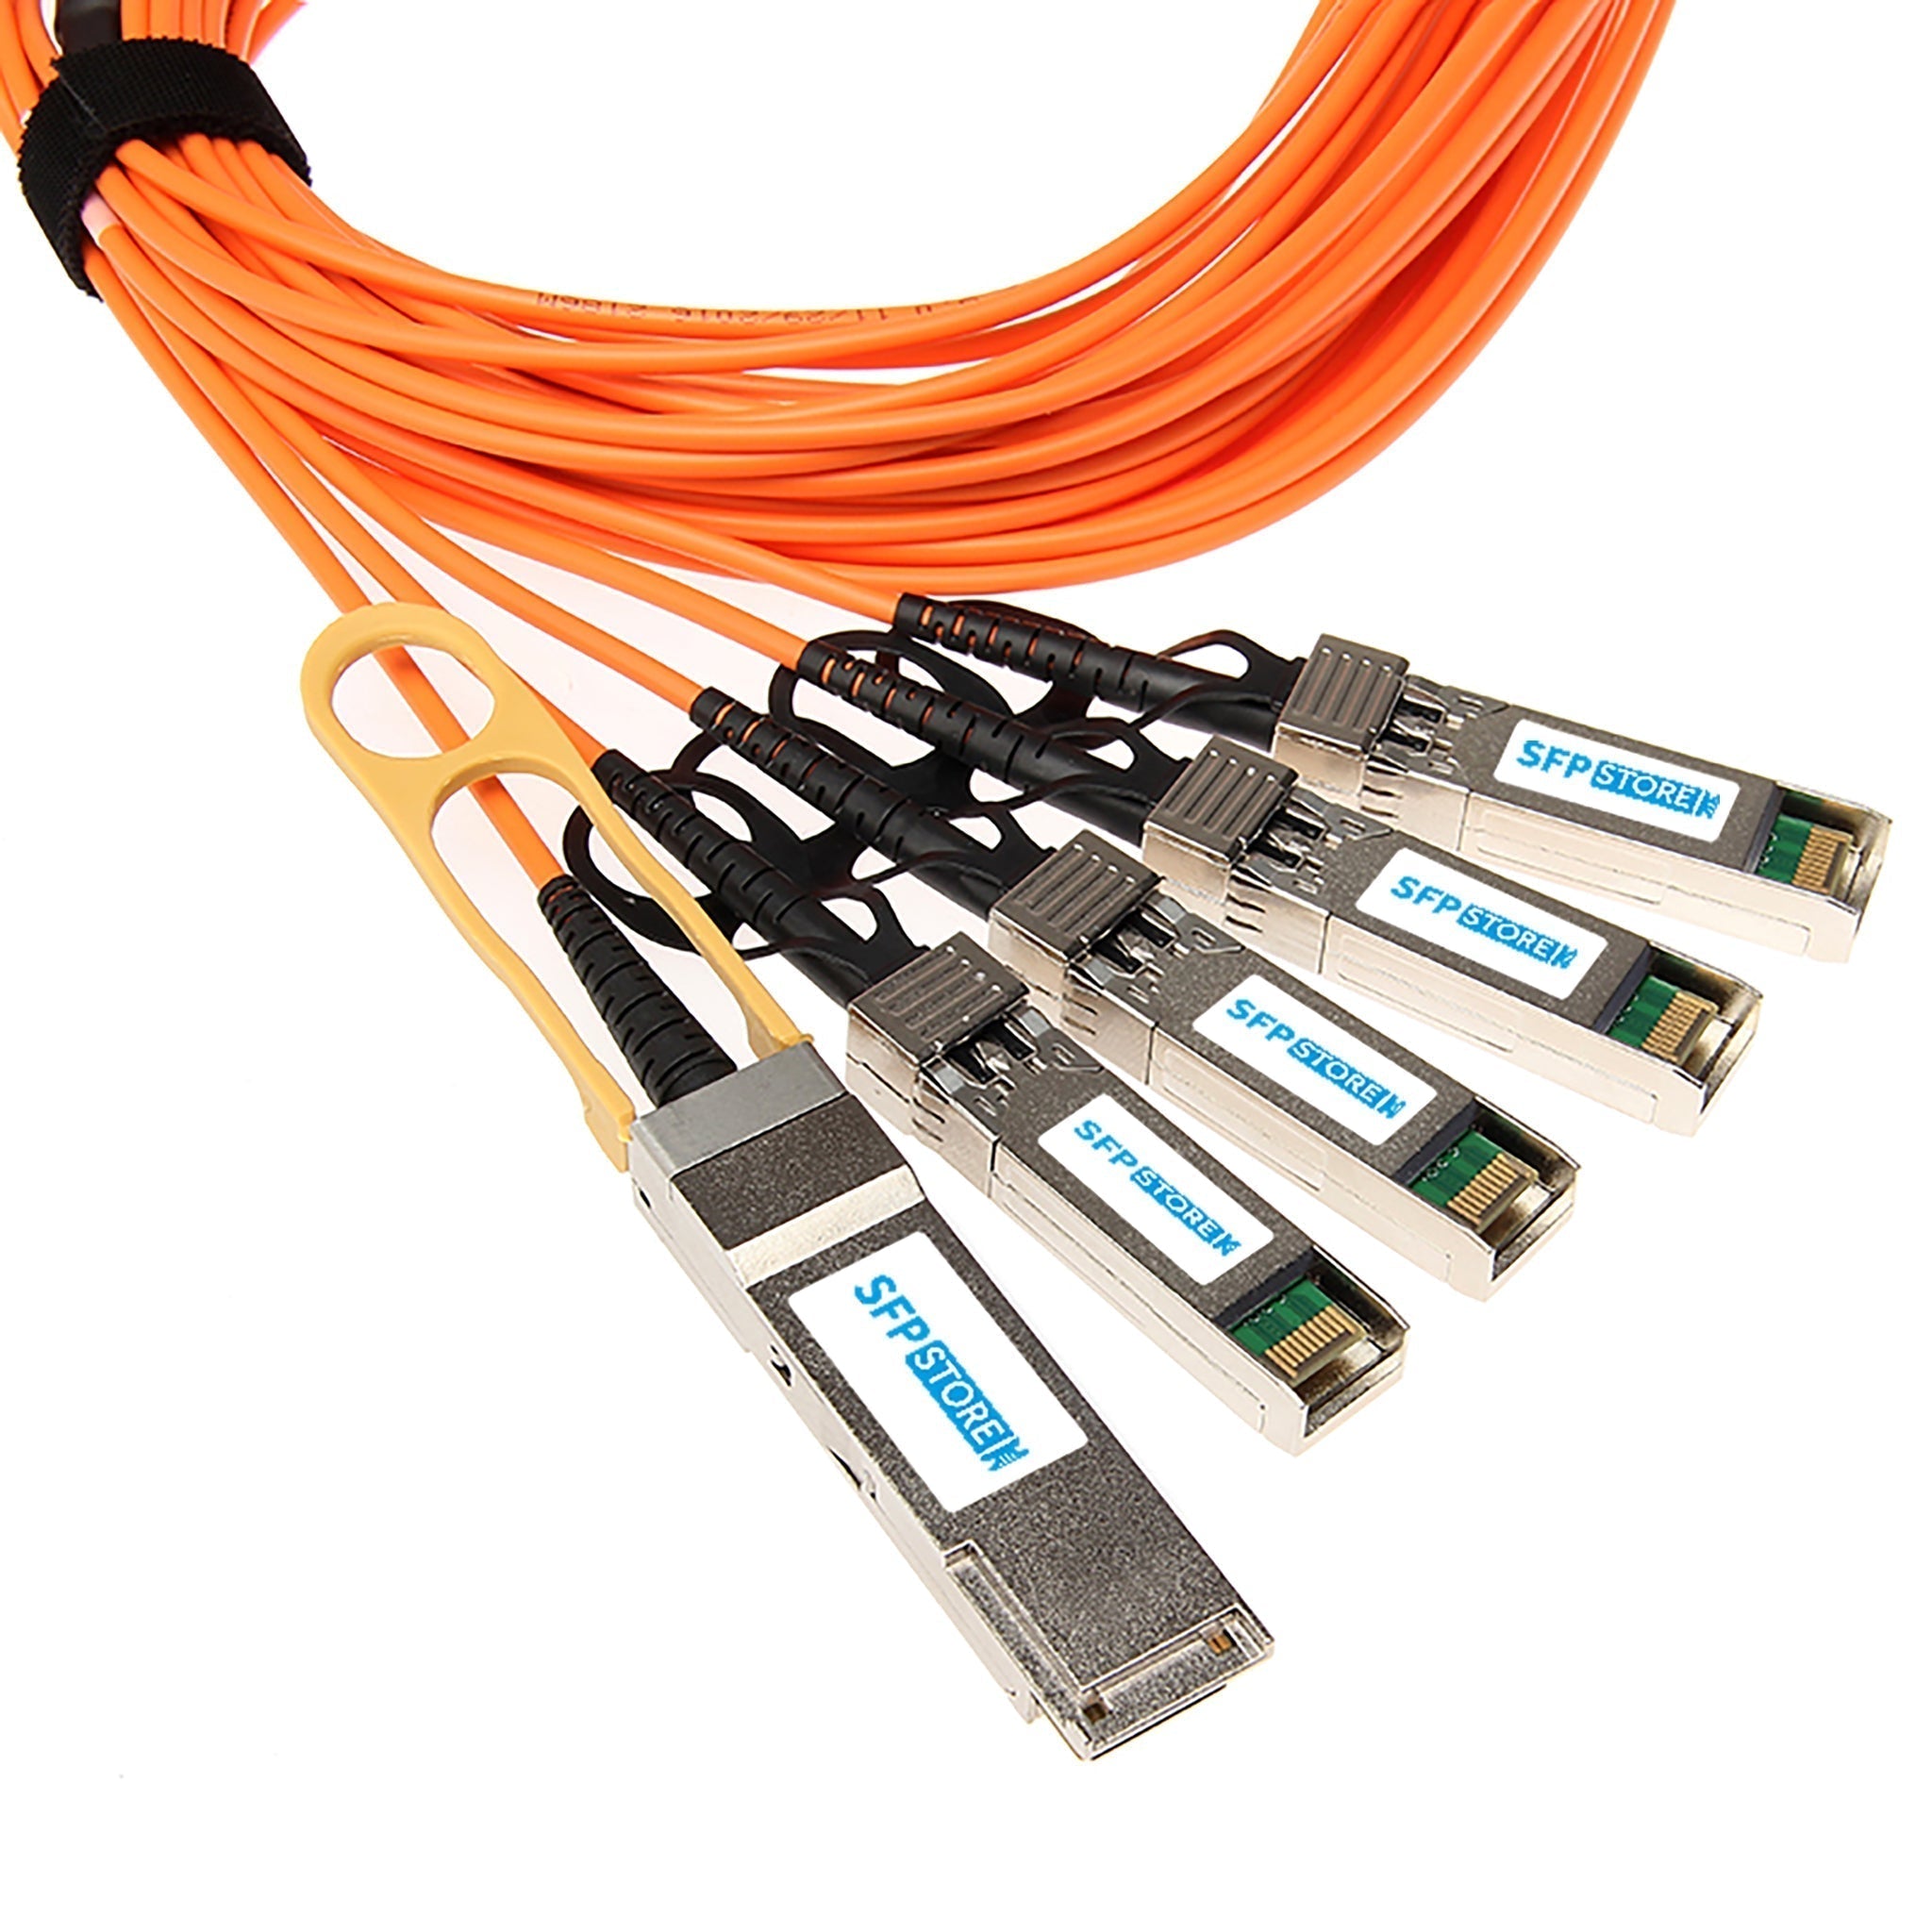 AOC-QSFP-4SFP-10G-10M-C - 10m Dell Compatible 40G QSFP+ to 4 x 10G SFP+ Active Optical Cable